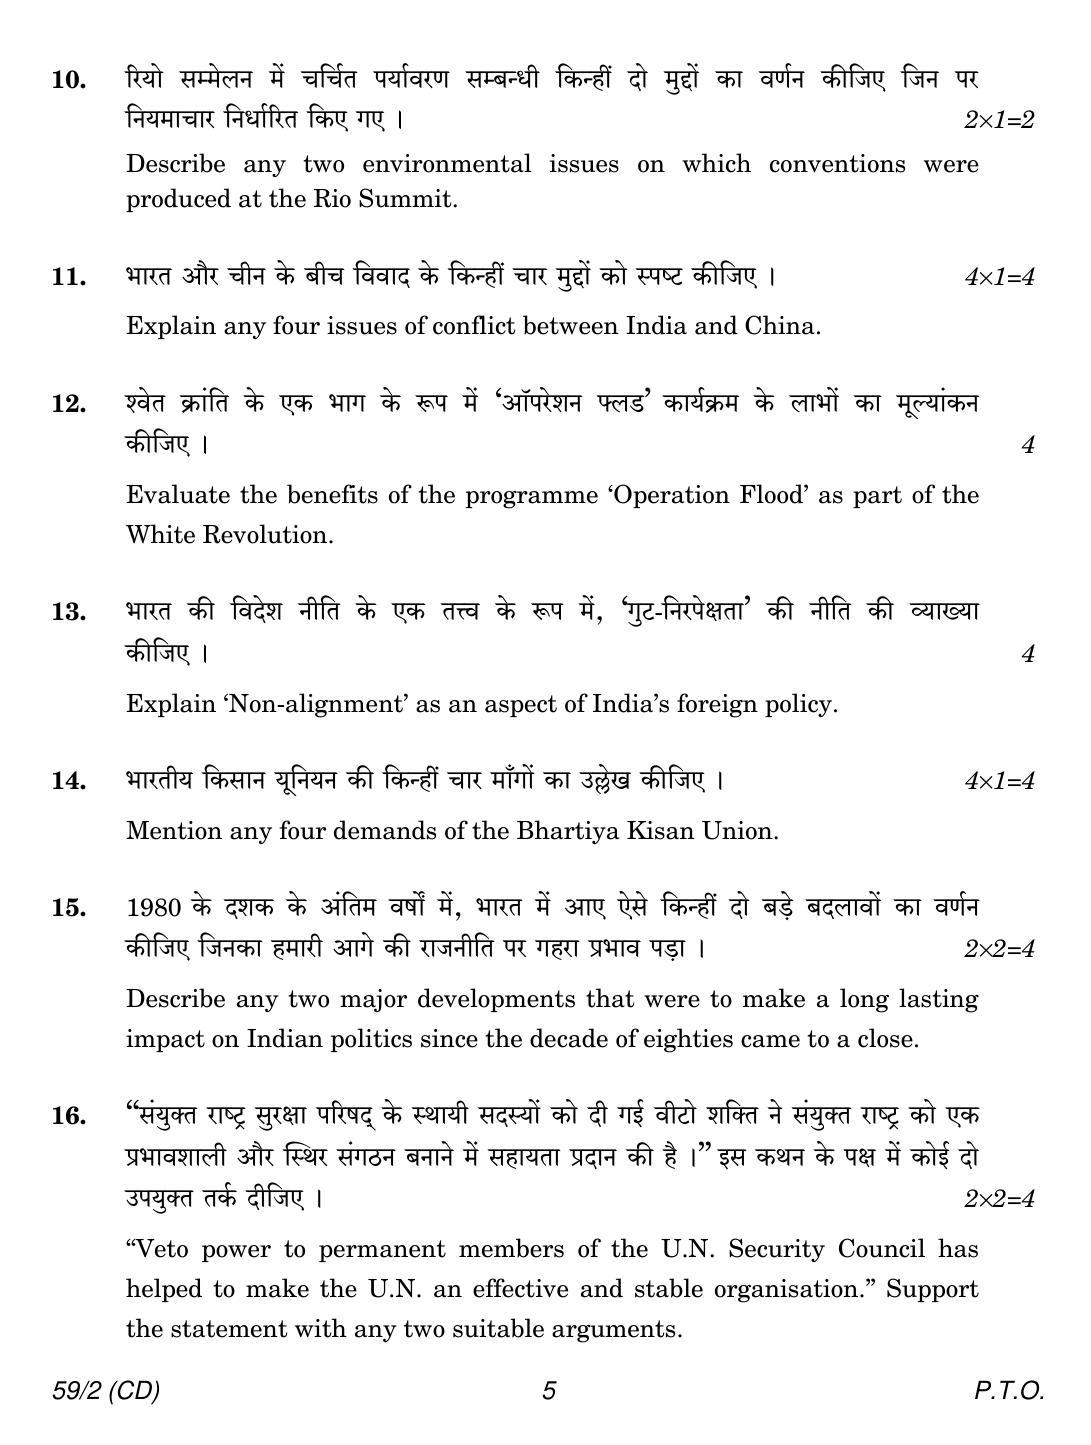 CBSE Class 12 59-2 POLITICAL SCIENCE CD 2018 Question Paper - Page 5